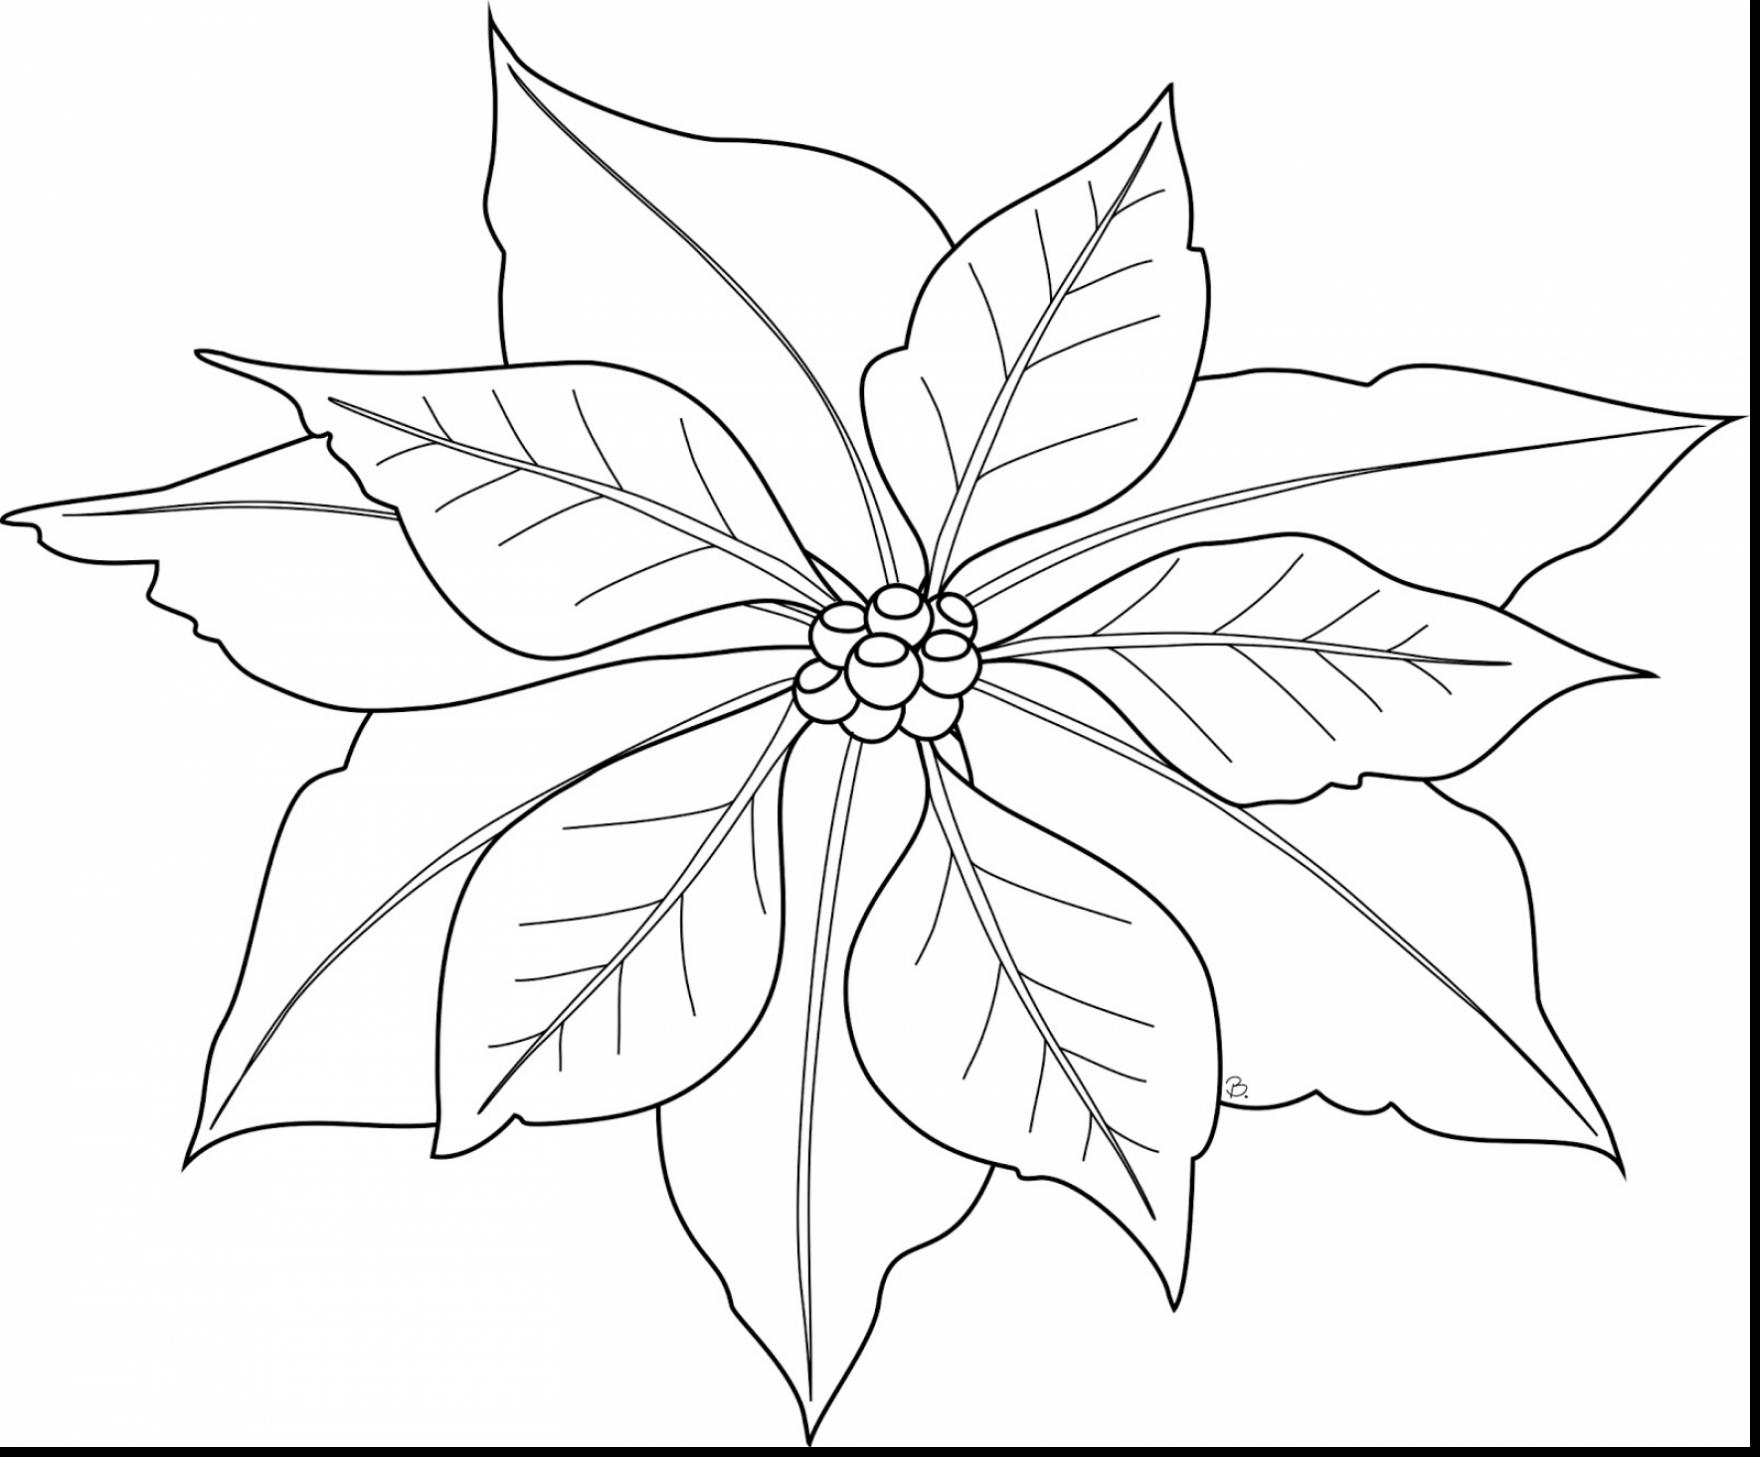 poinsettia-drawing-outline-at-getdrawings-free-download